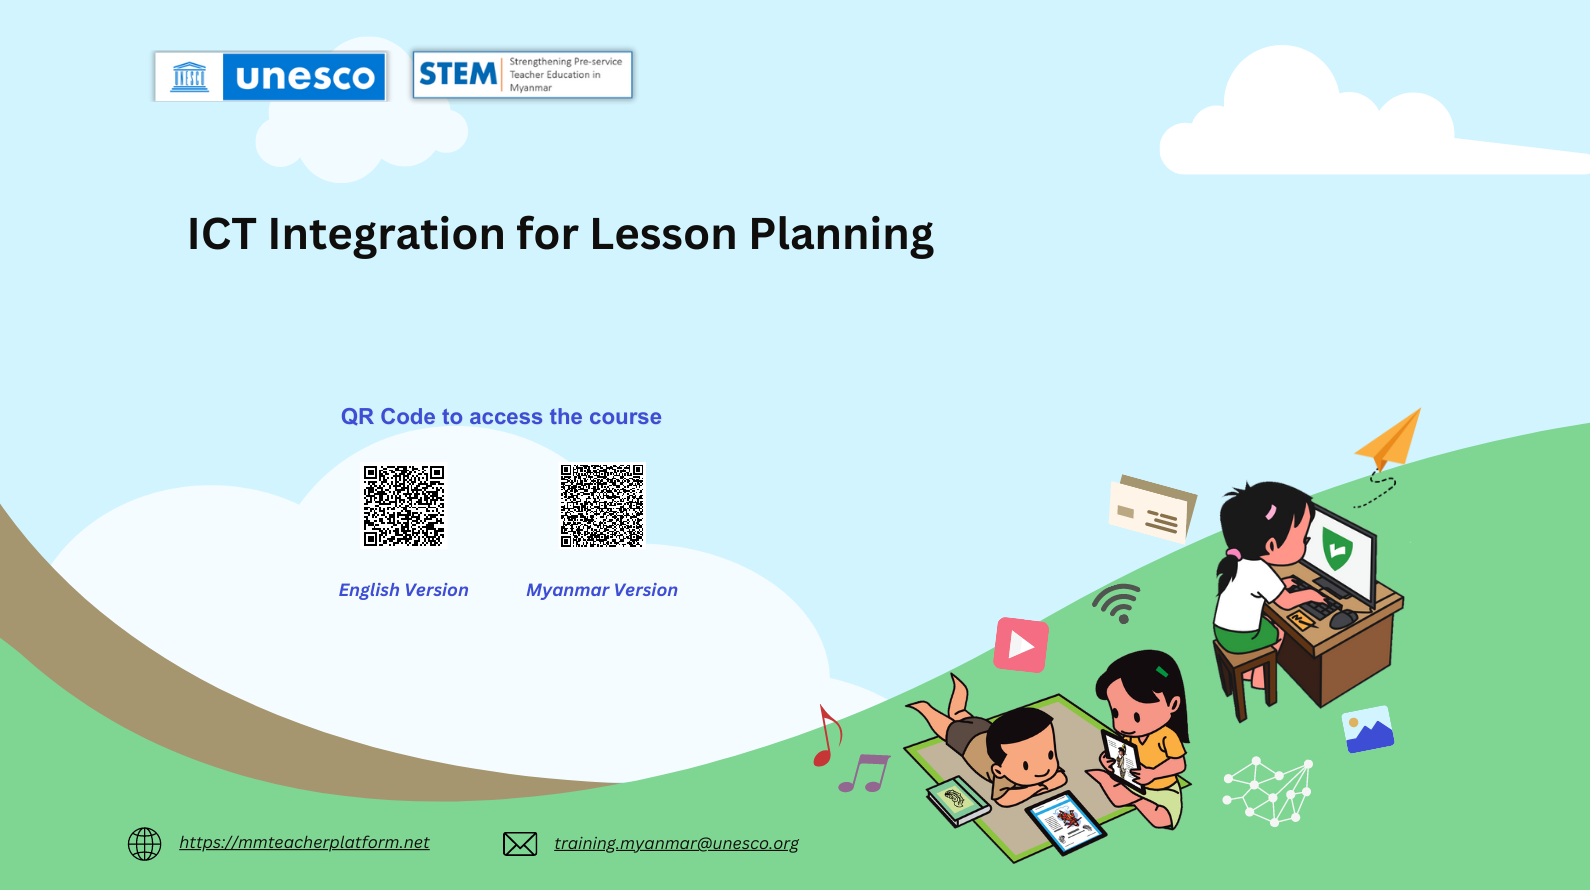 ICT Integration for Lesson Planning